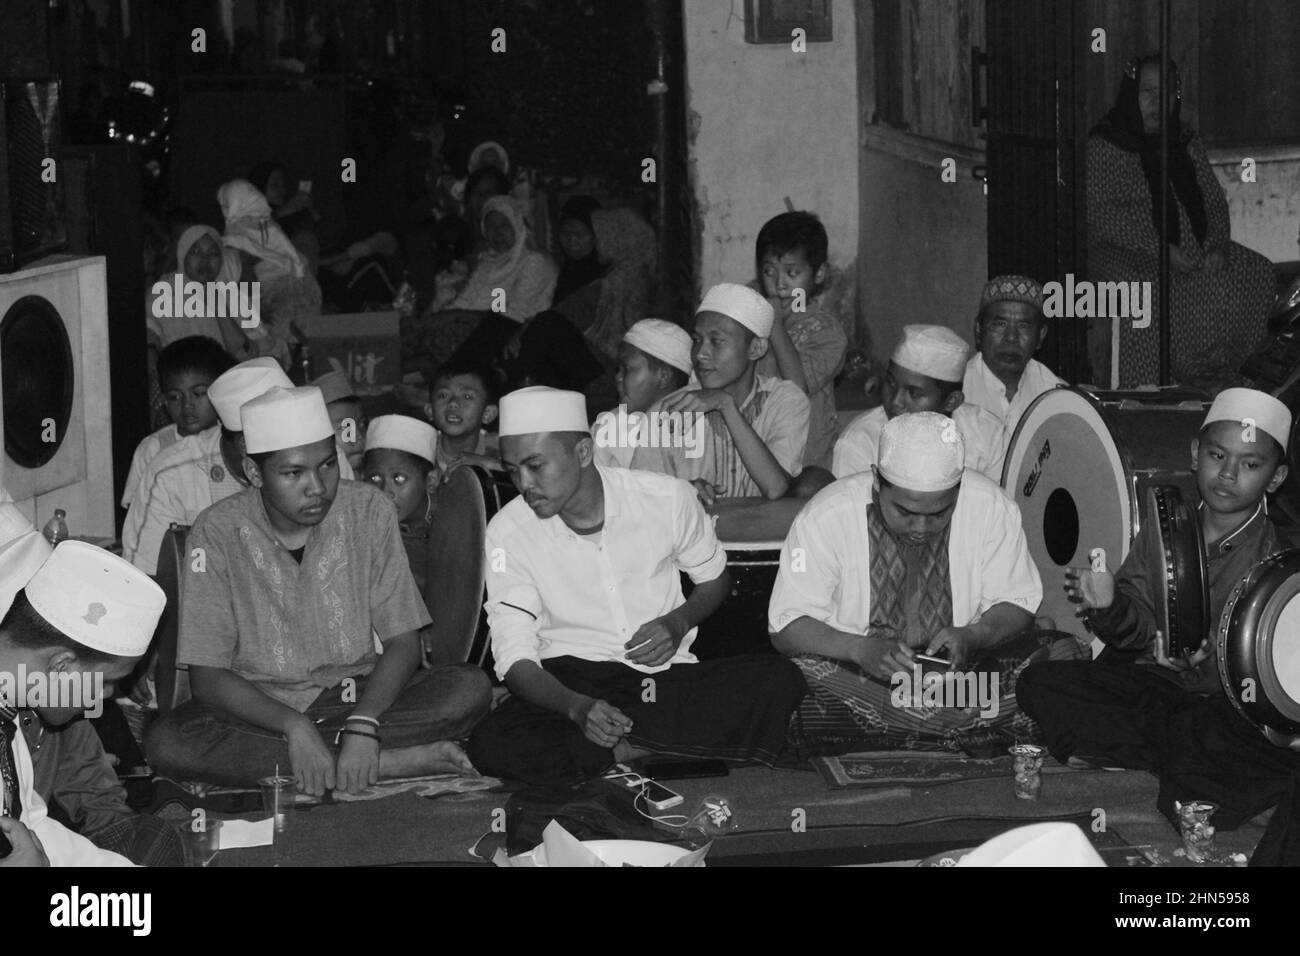 Jakarta, Indonesia - 11 19 2020: enthusiastic Muslims attend the celebration of the Prophet Muhammad's birthday Stock Photo